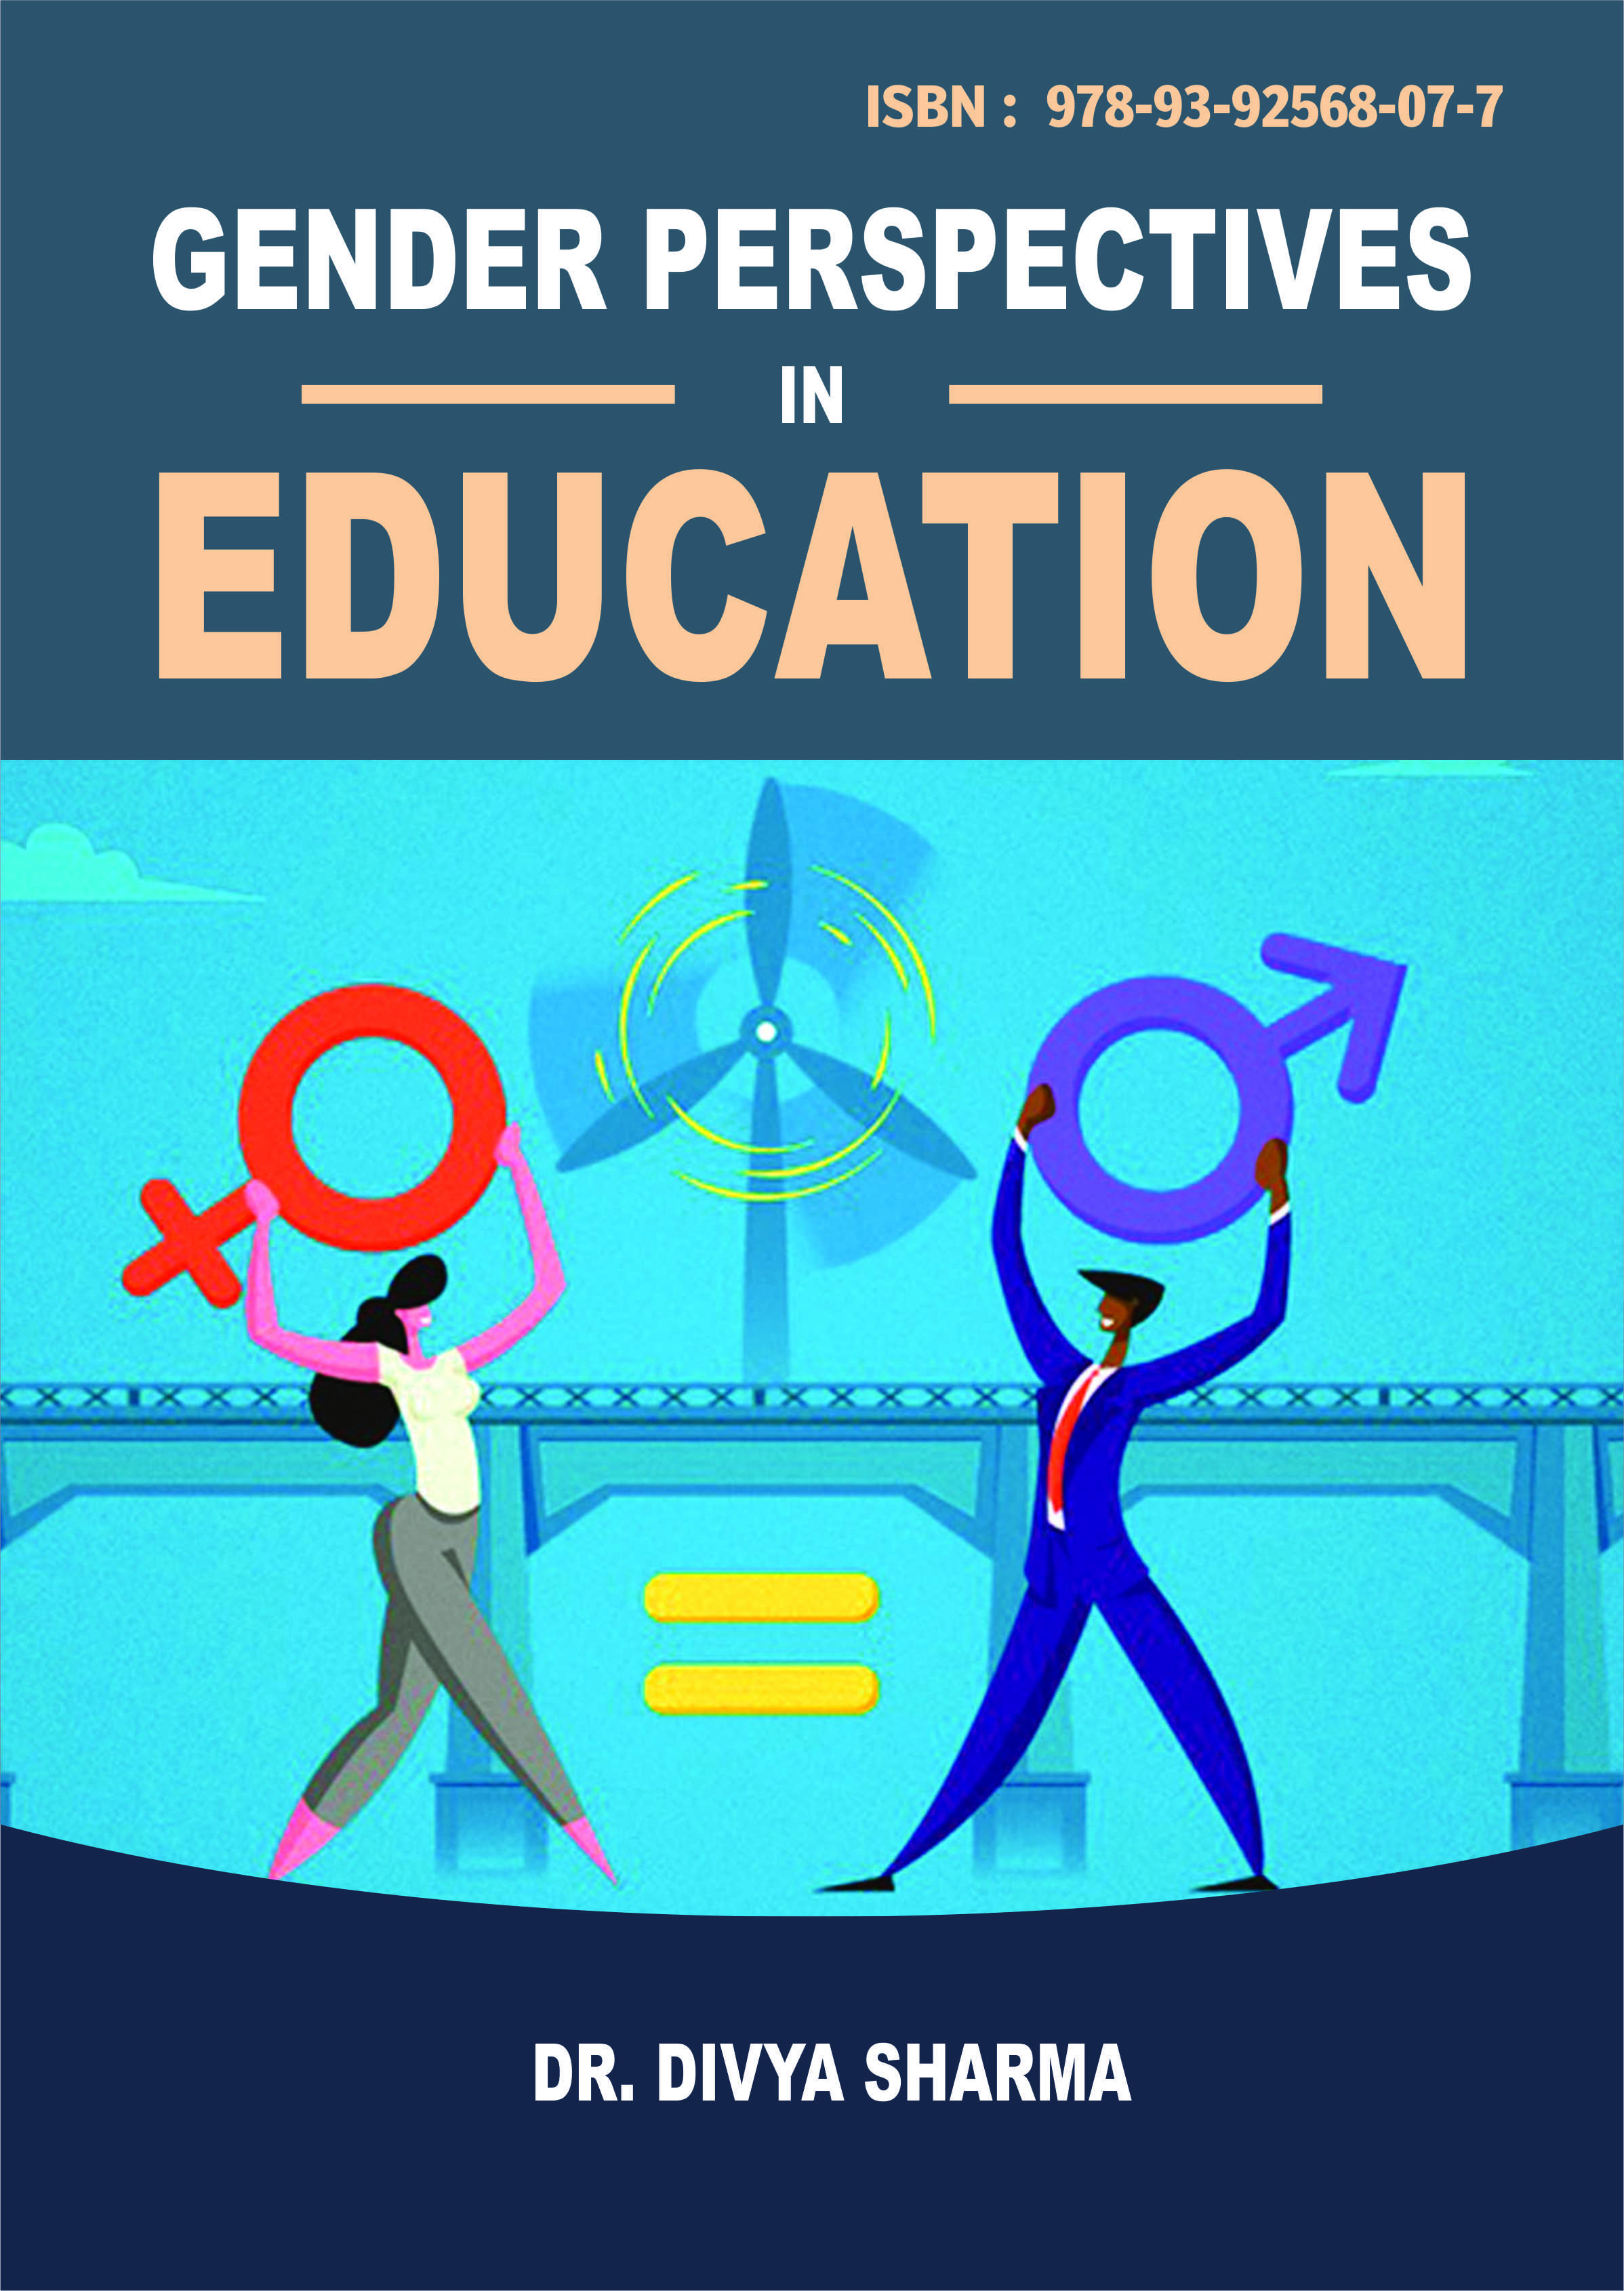 Gender Perspectives in Education